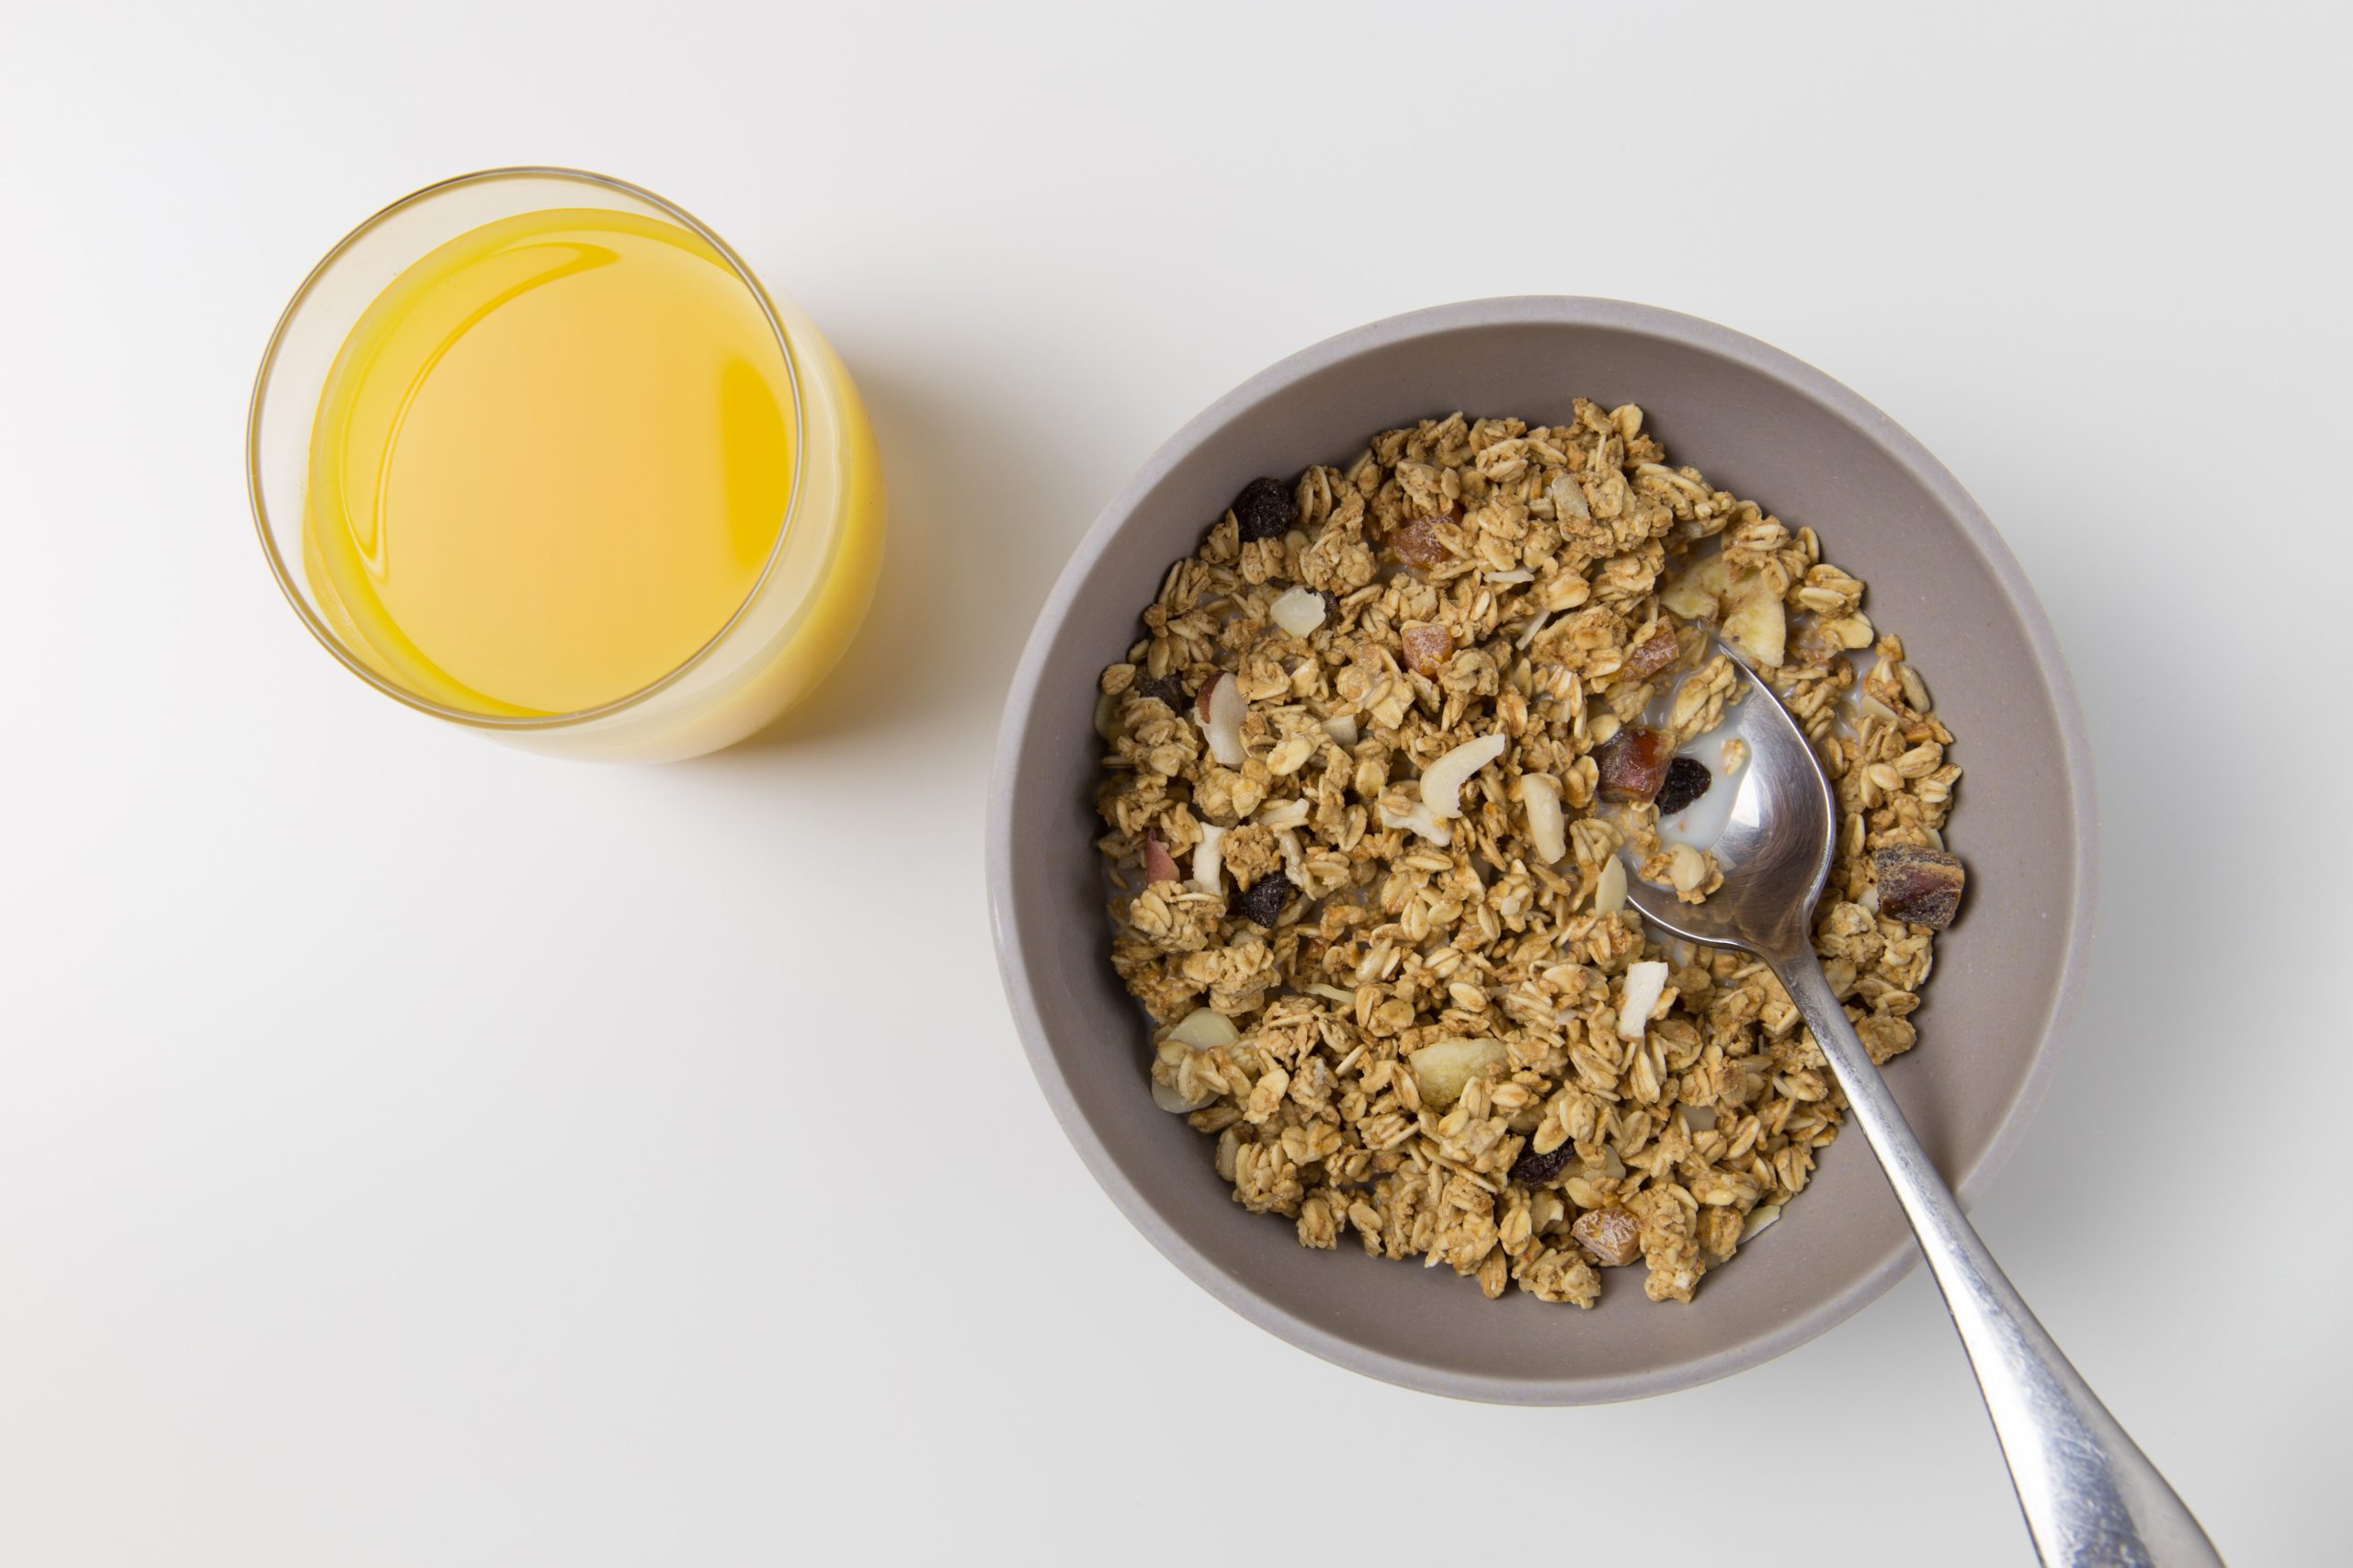 Bowl of cereal with orange juice. Fortified cereal is a great source of ion and can help reduce our risk of developing anemia.